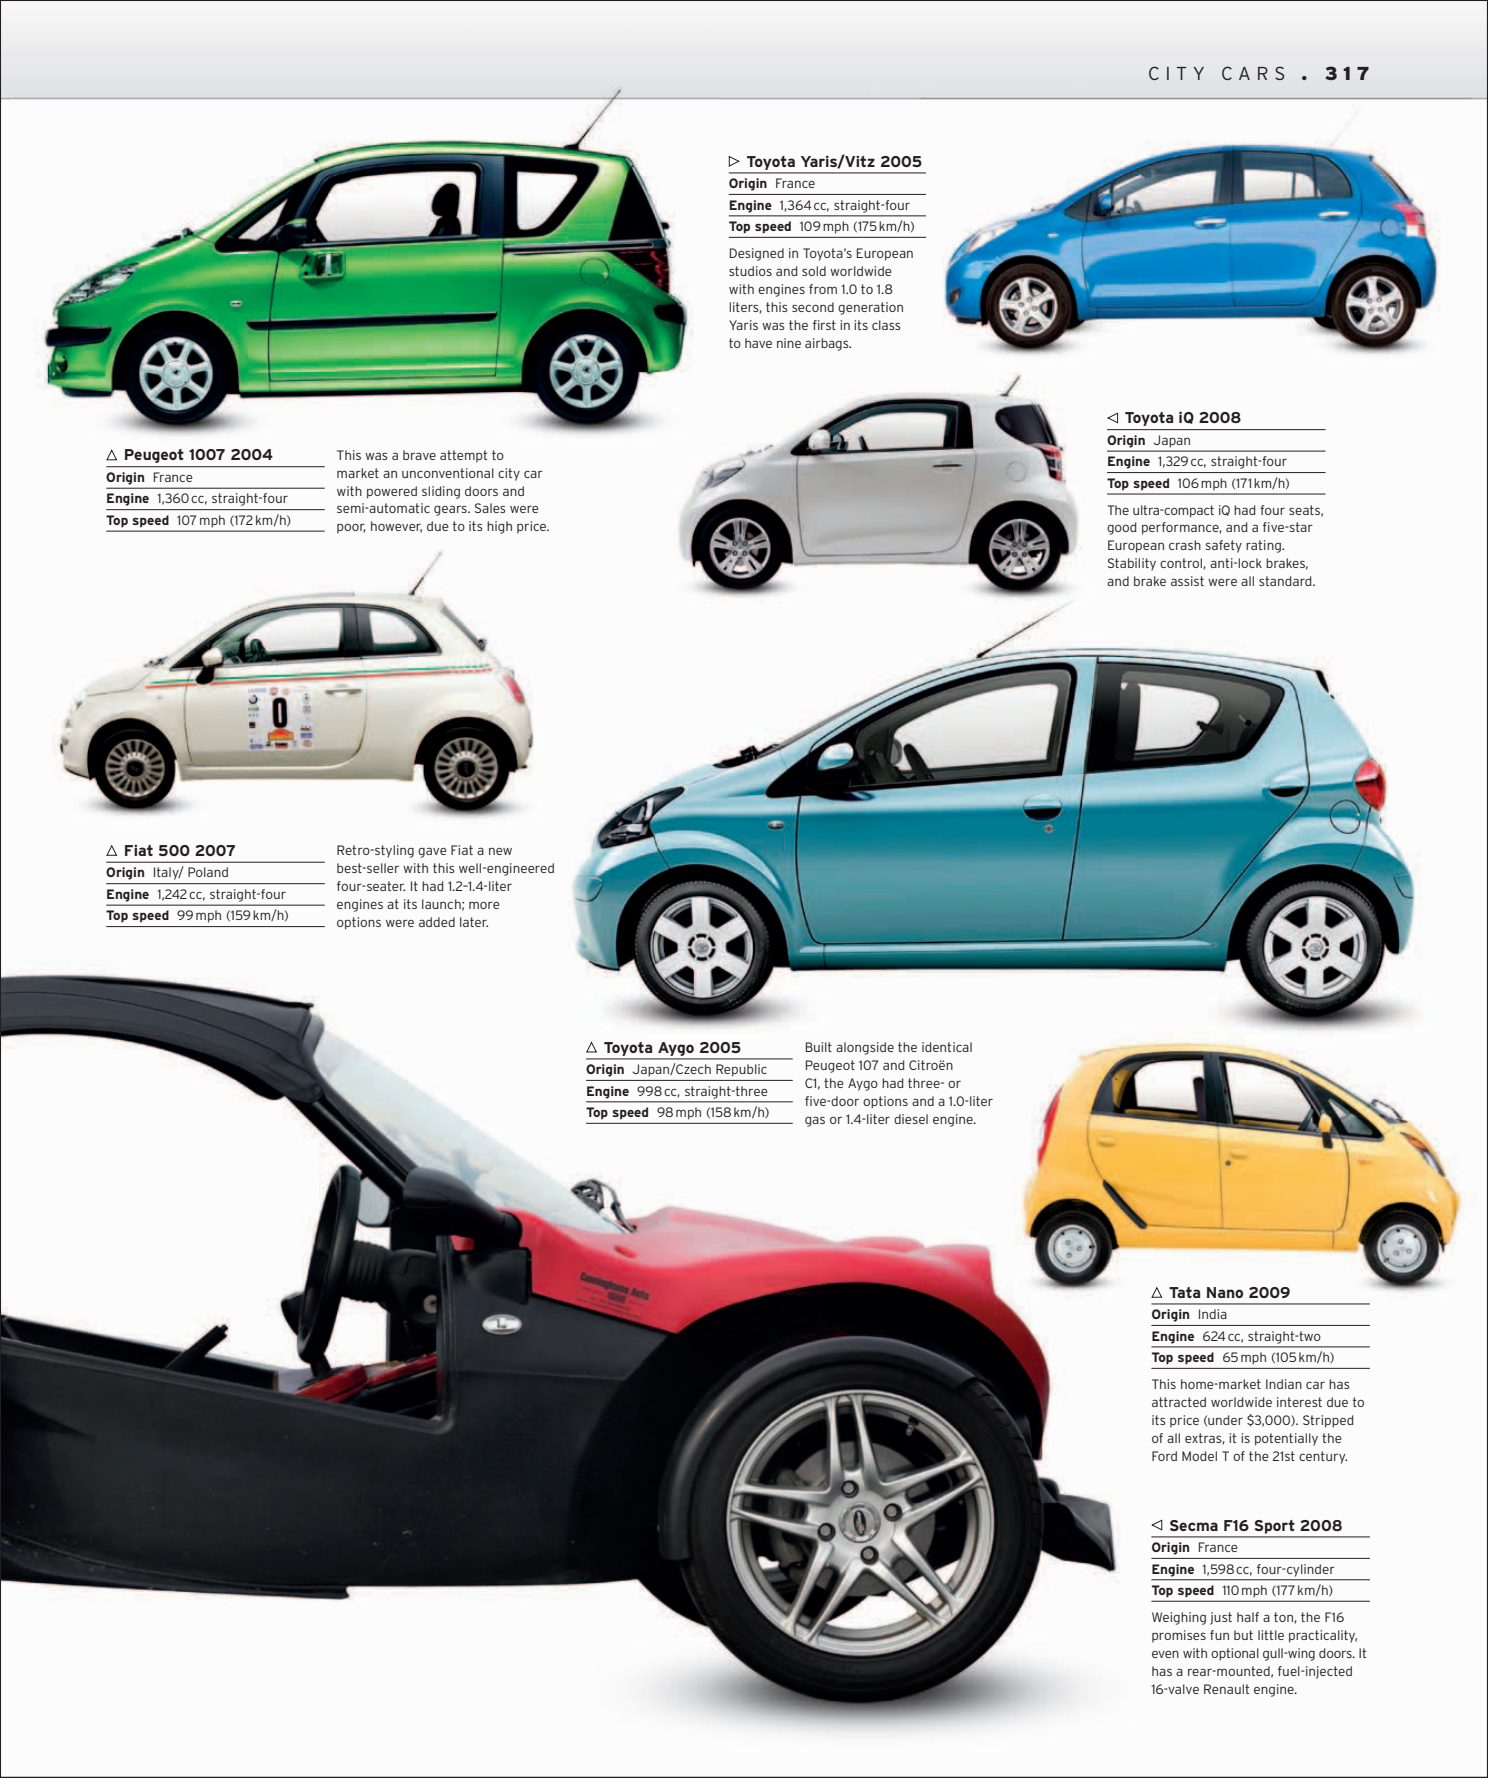 Car%20-%20The%20Definitive%20Visual%20History%20of%20the%20Automobile_319.png